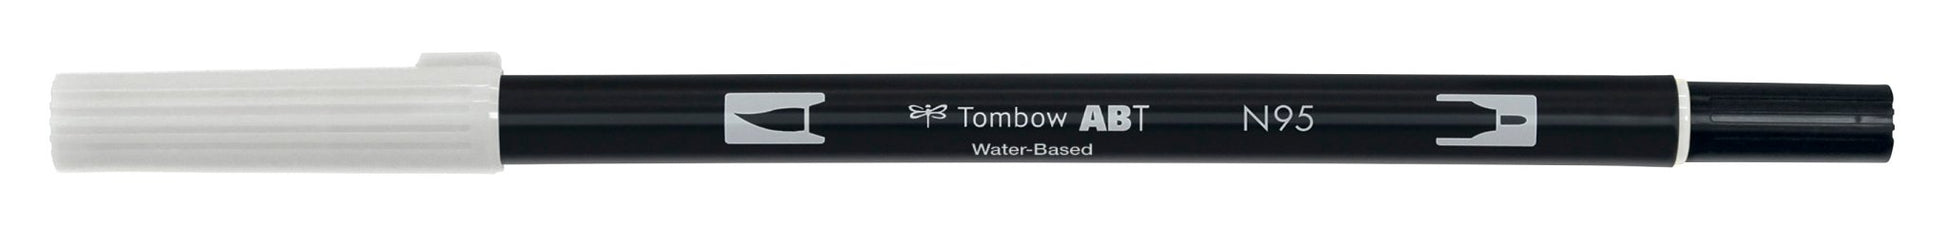 Tombow ABT dual brush pen - single colours - Tombow - Cool gray 1 ABT-N95 - millenotes